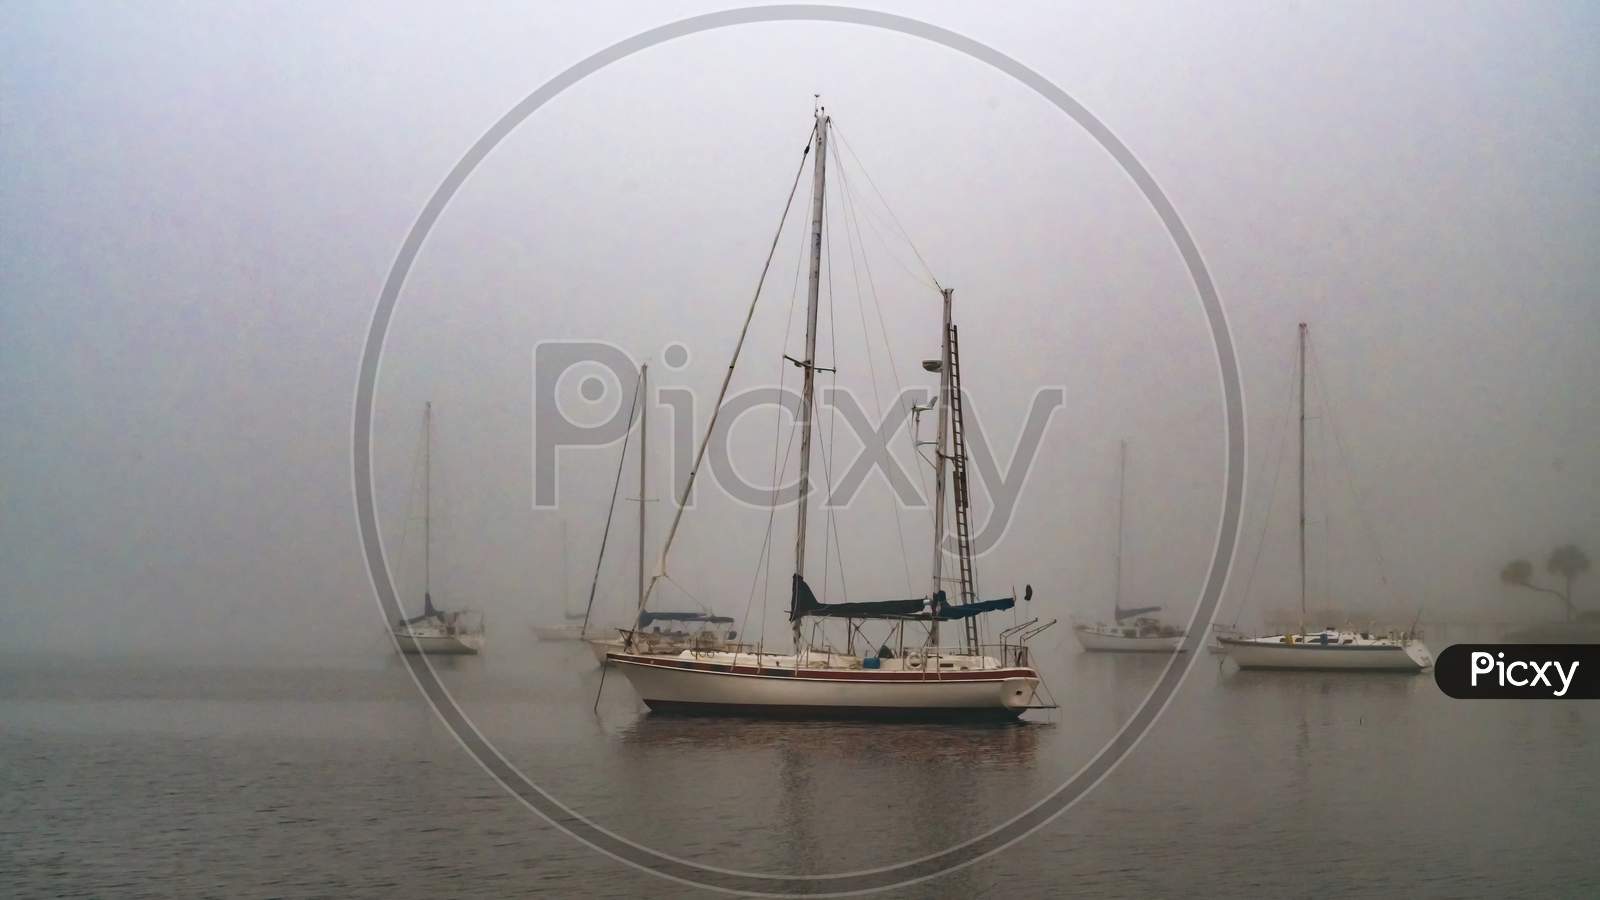 Sailboats Anchored In Thick Grey Foggy Harbor In The Morning